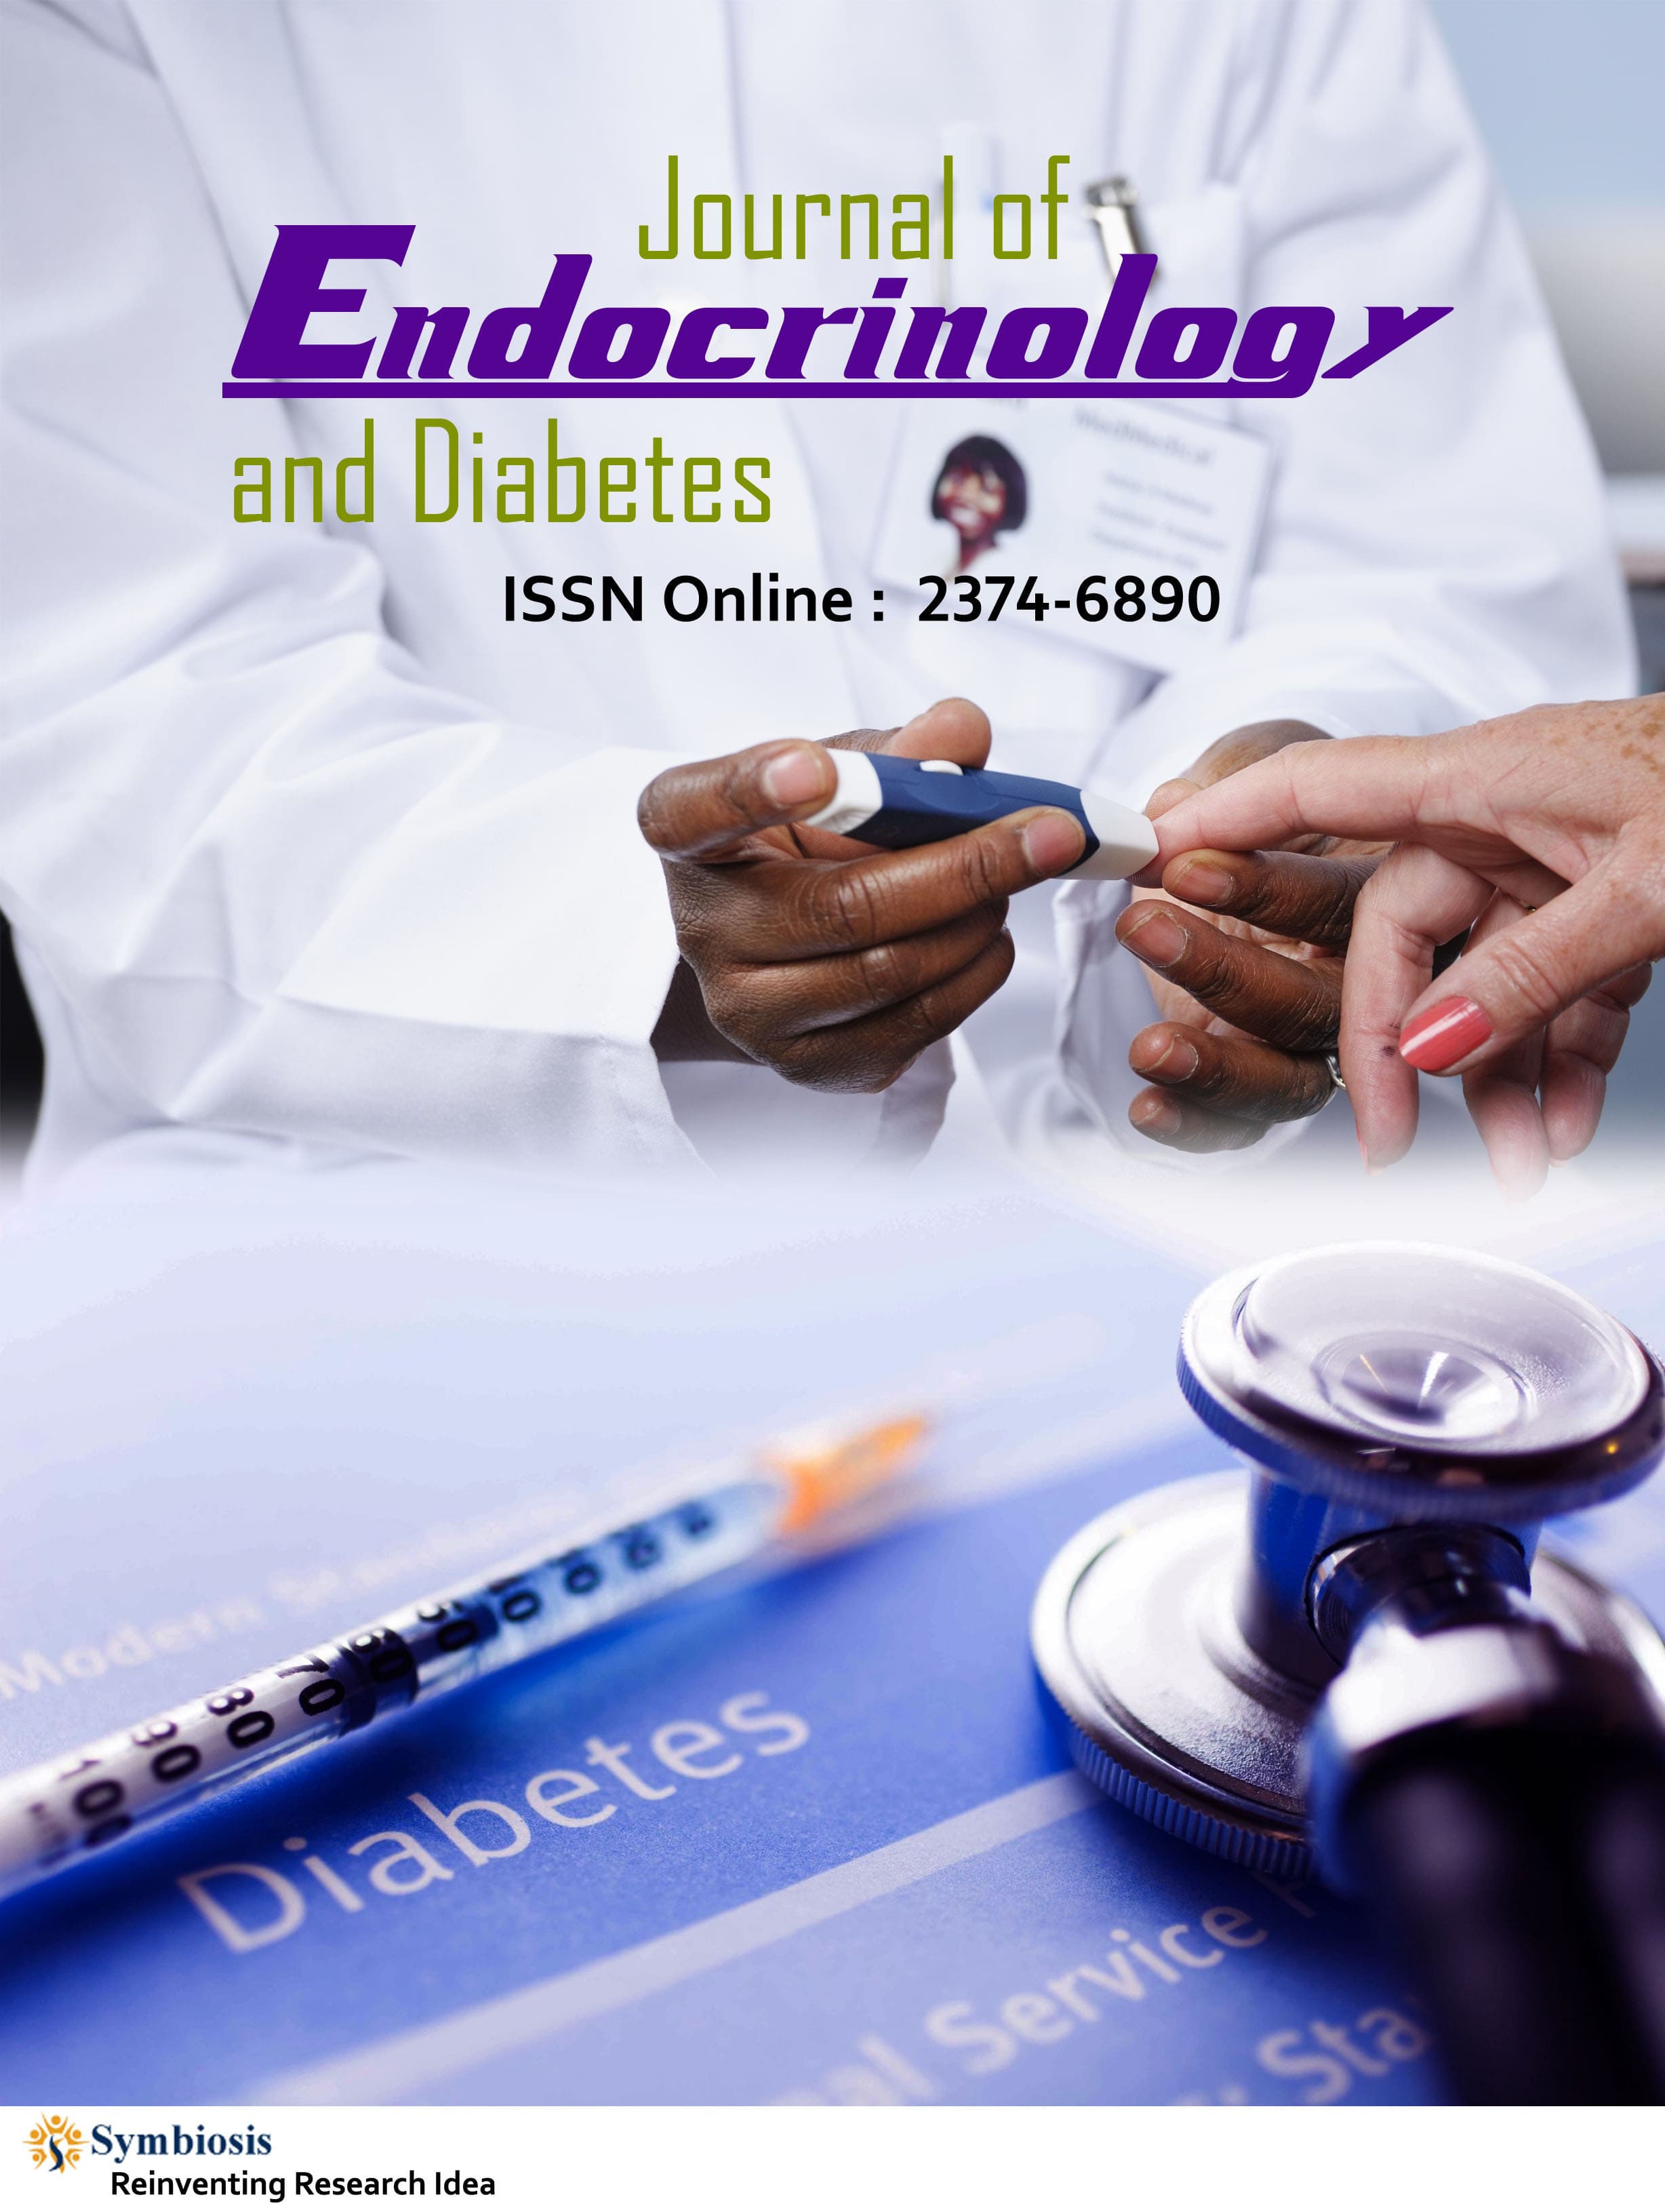 international journal of diabetes and endocrinology impact factor